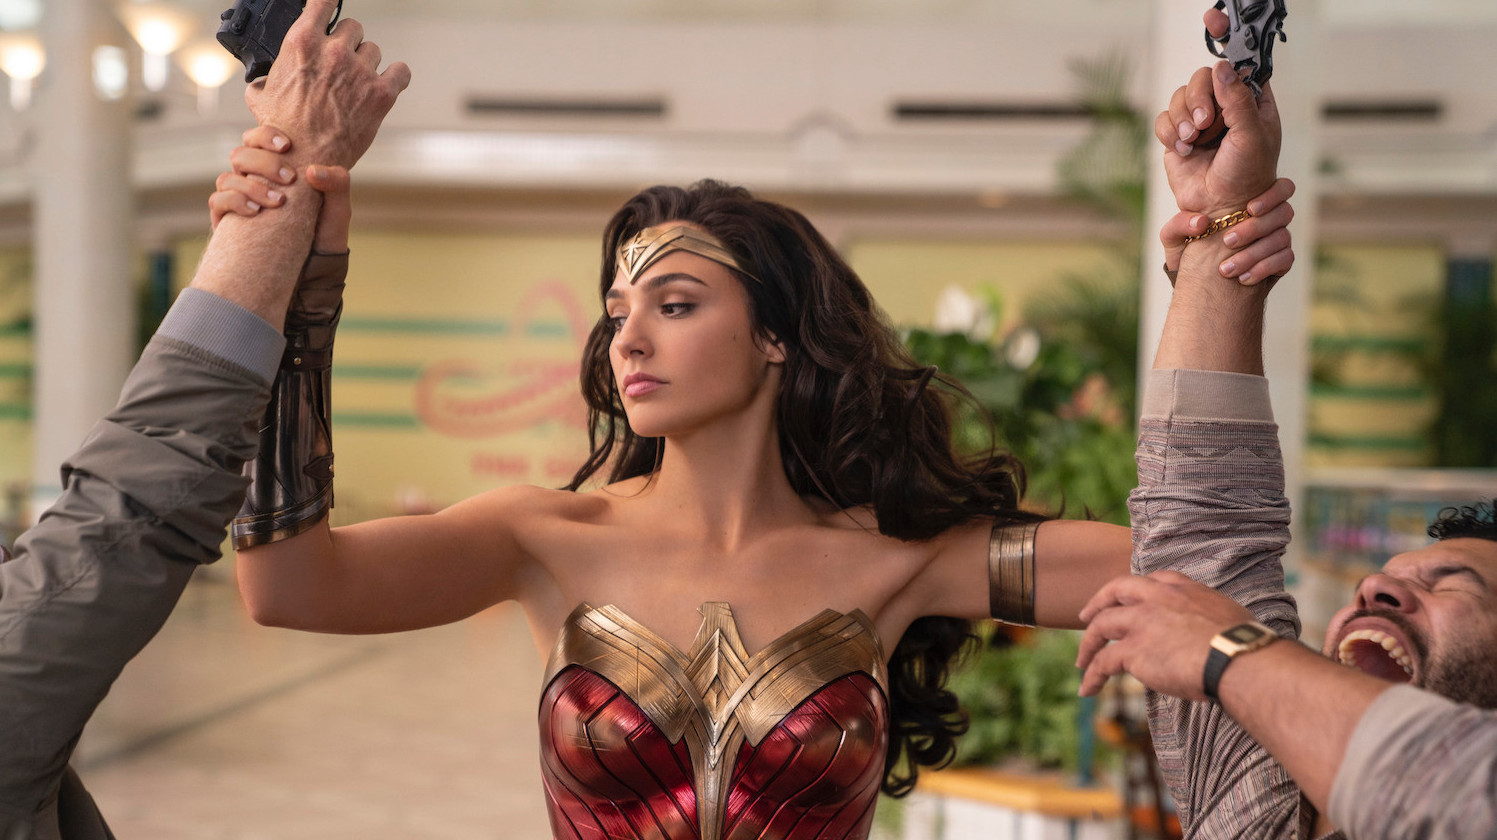 Wonder Woman 1984 is one of the DC films that will be featured at DC FanDome, Warner Bros.' online fan event. (Photo: Warner Bros.)